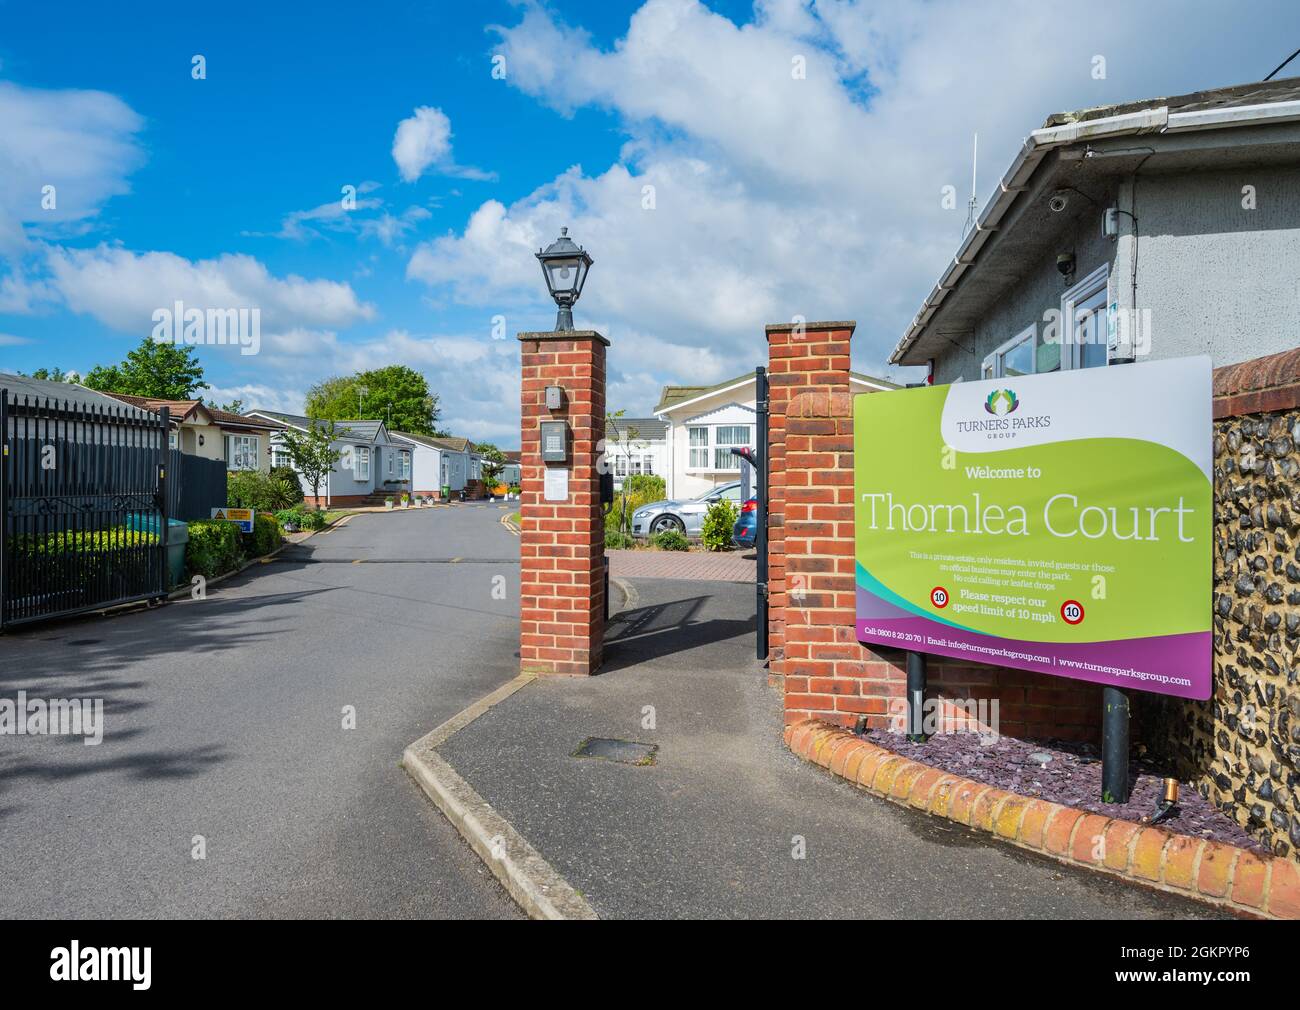 Thornlea Court, a residential park owned by Turners Parks Group in Lyminster, West Sussex, England, UK. Stock Photo